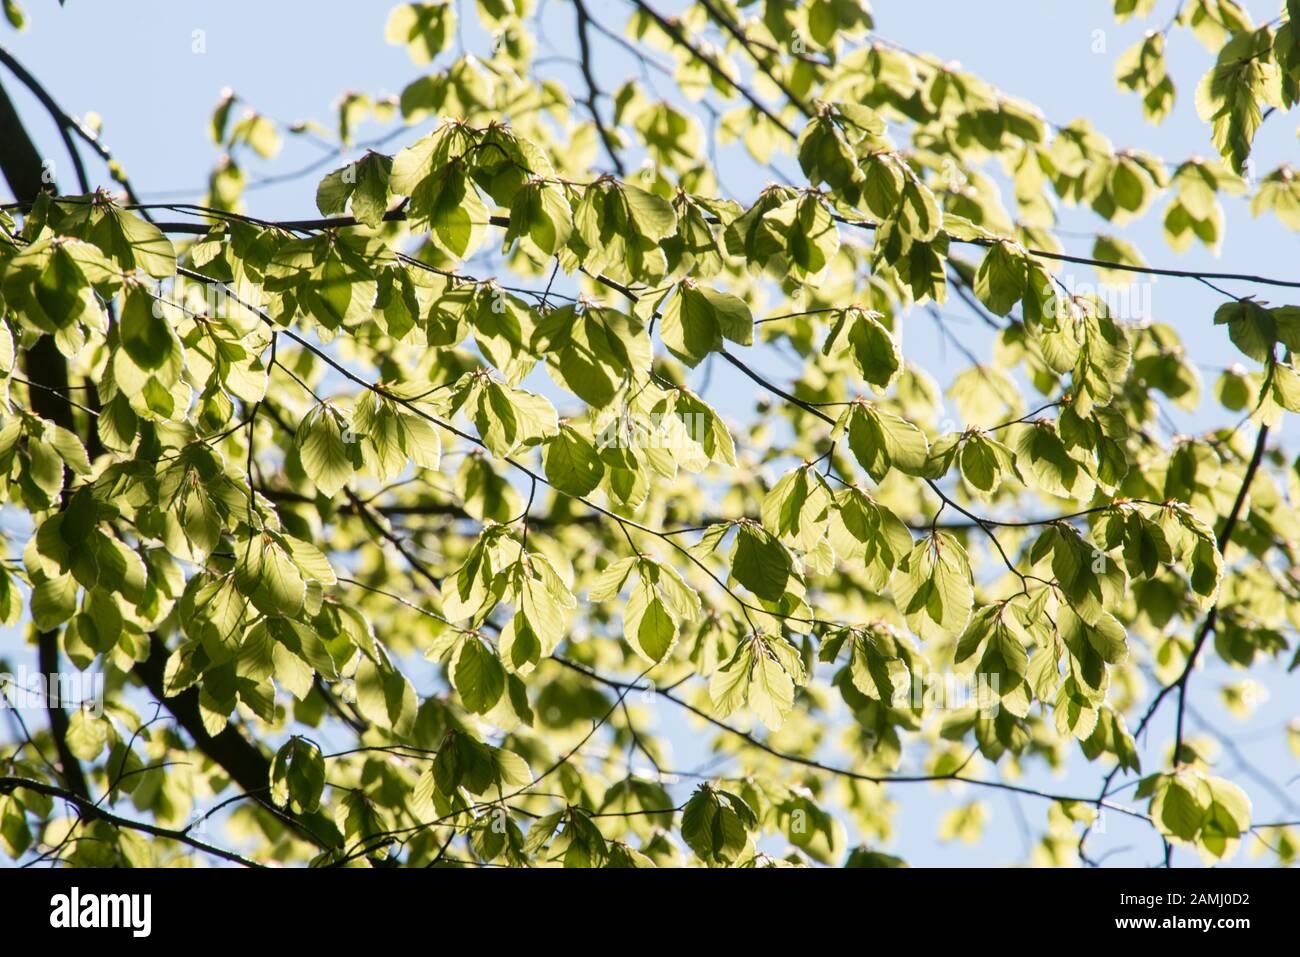 Detail of the leaves of a beech tree in spring with fresh green leaves Stock Photo